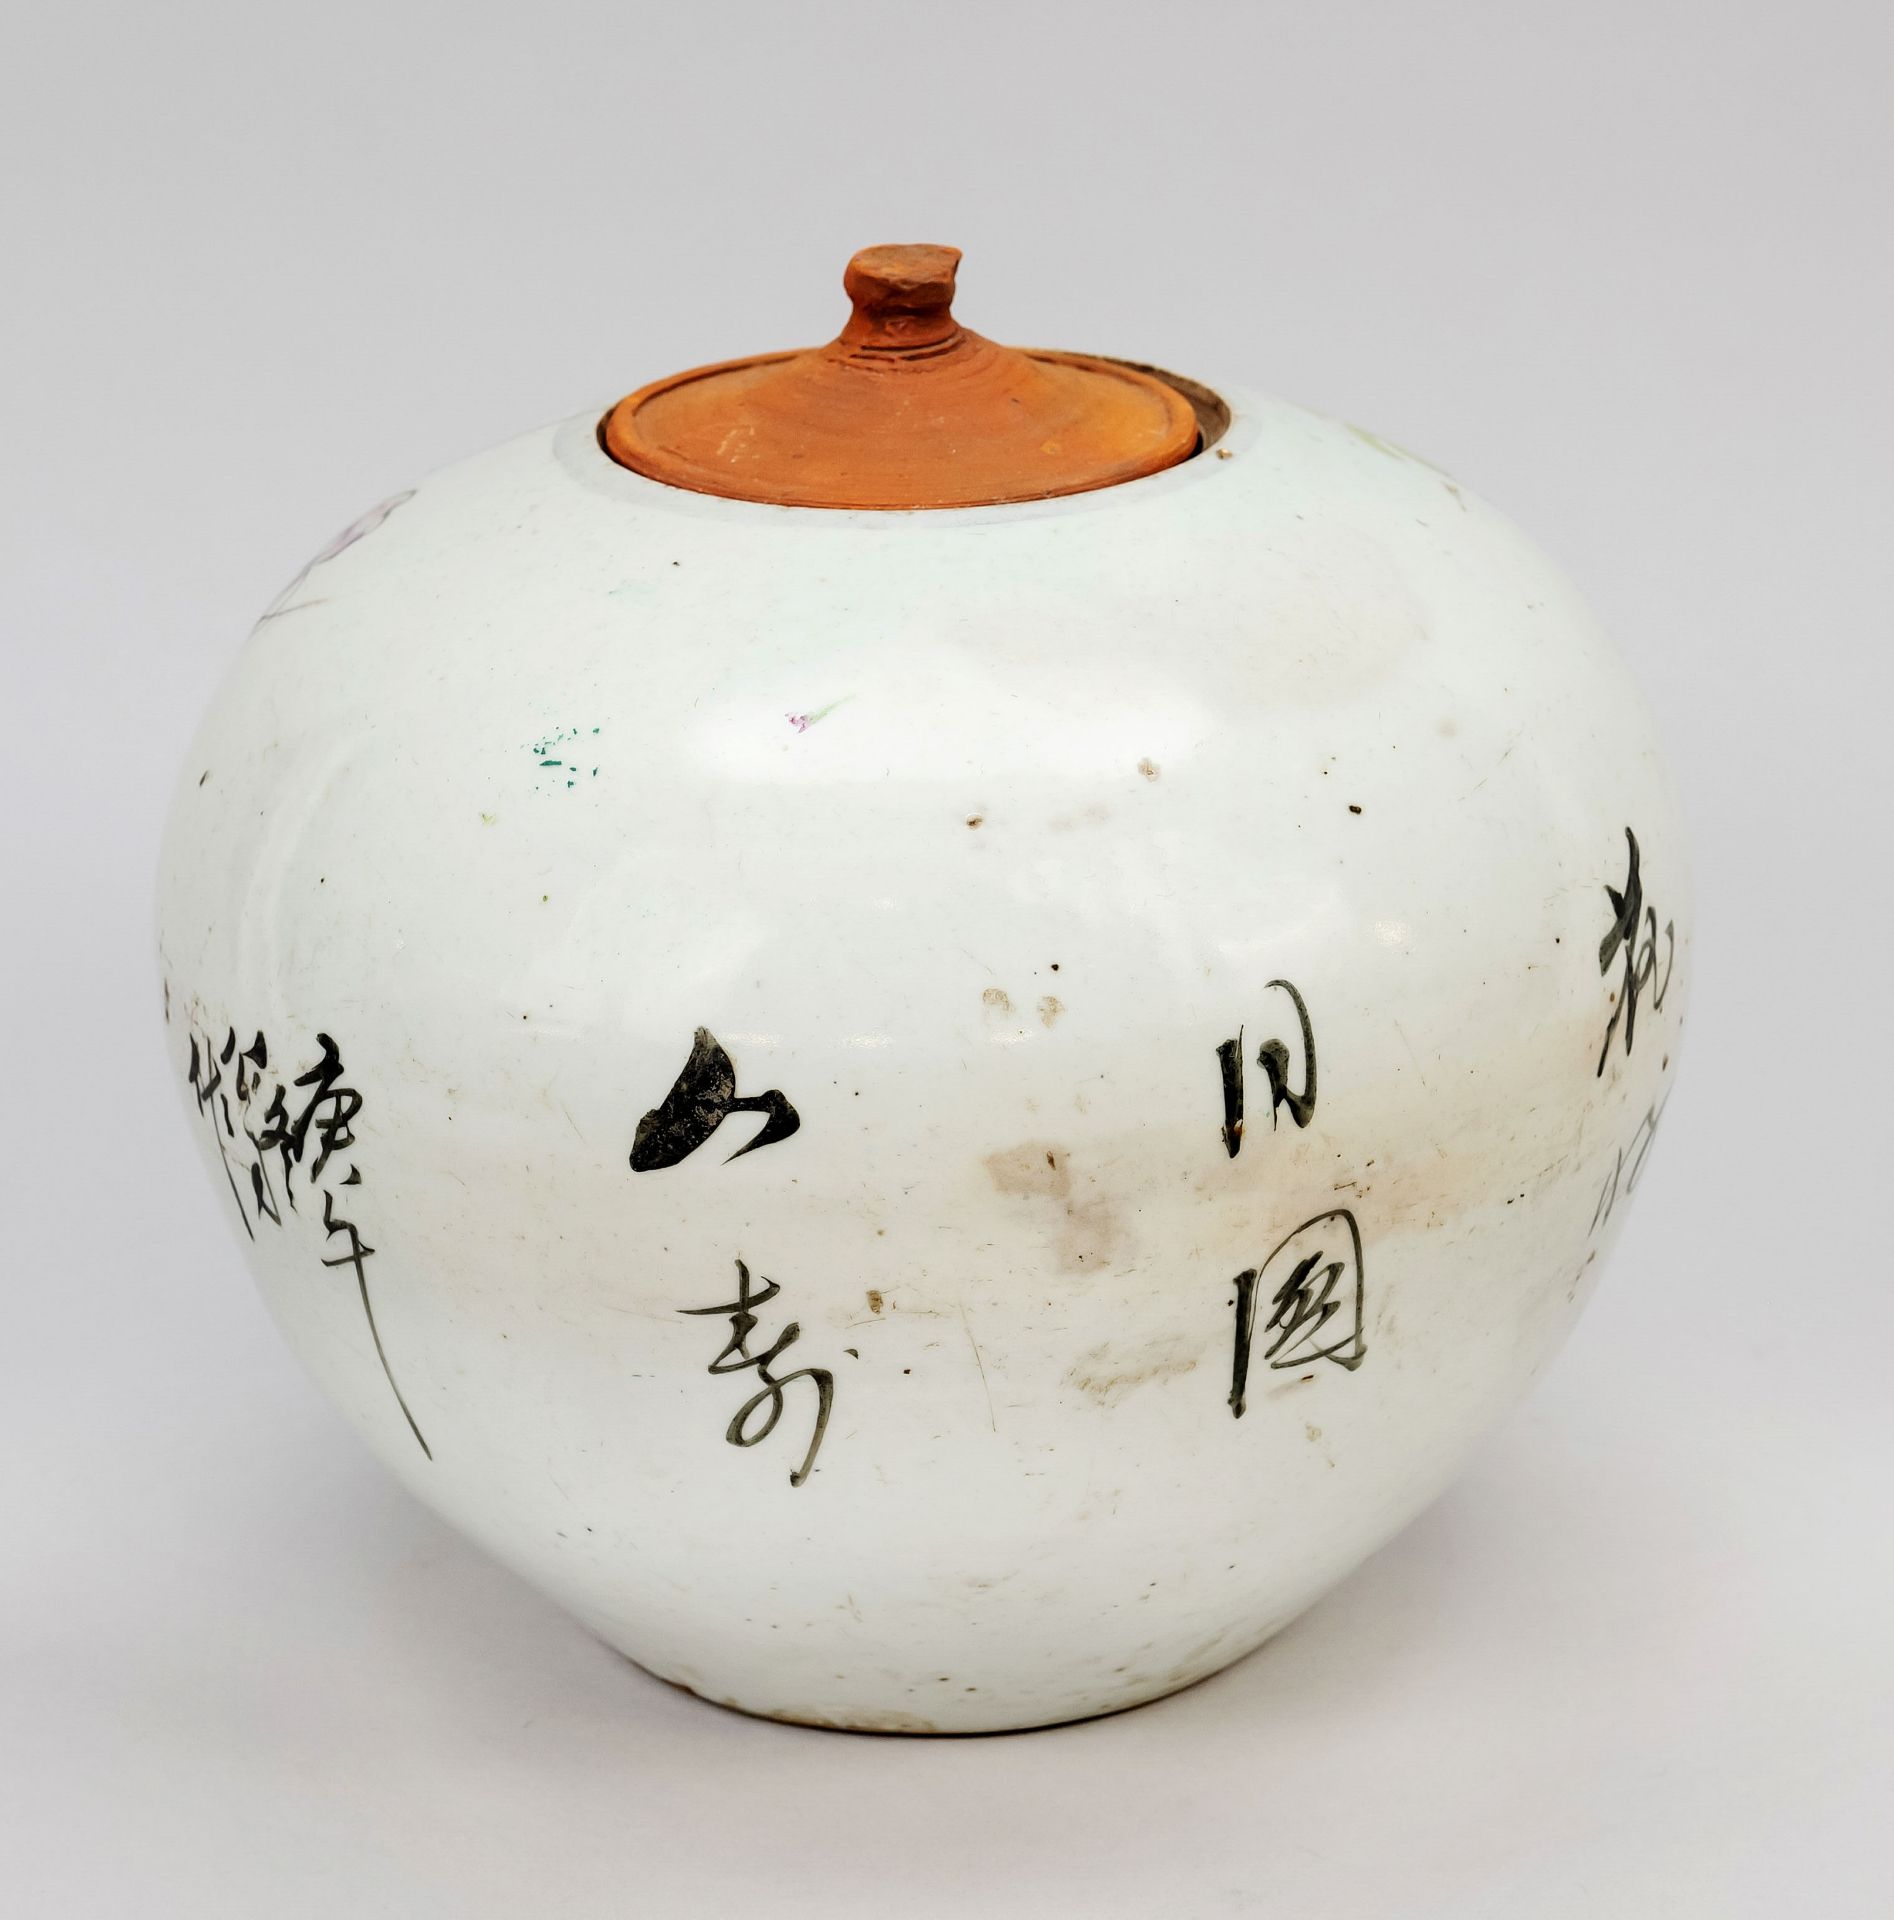 Spherical pot, China, probably republic period(1912-1949), porcelain with polychrome glaze - Image 2 of 2